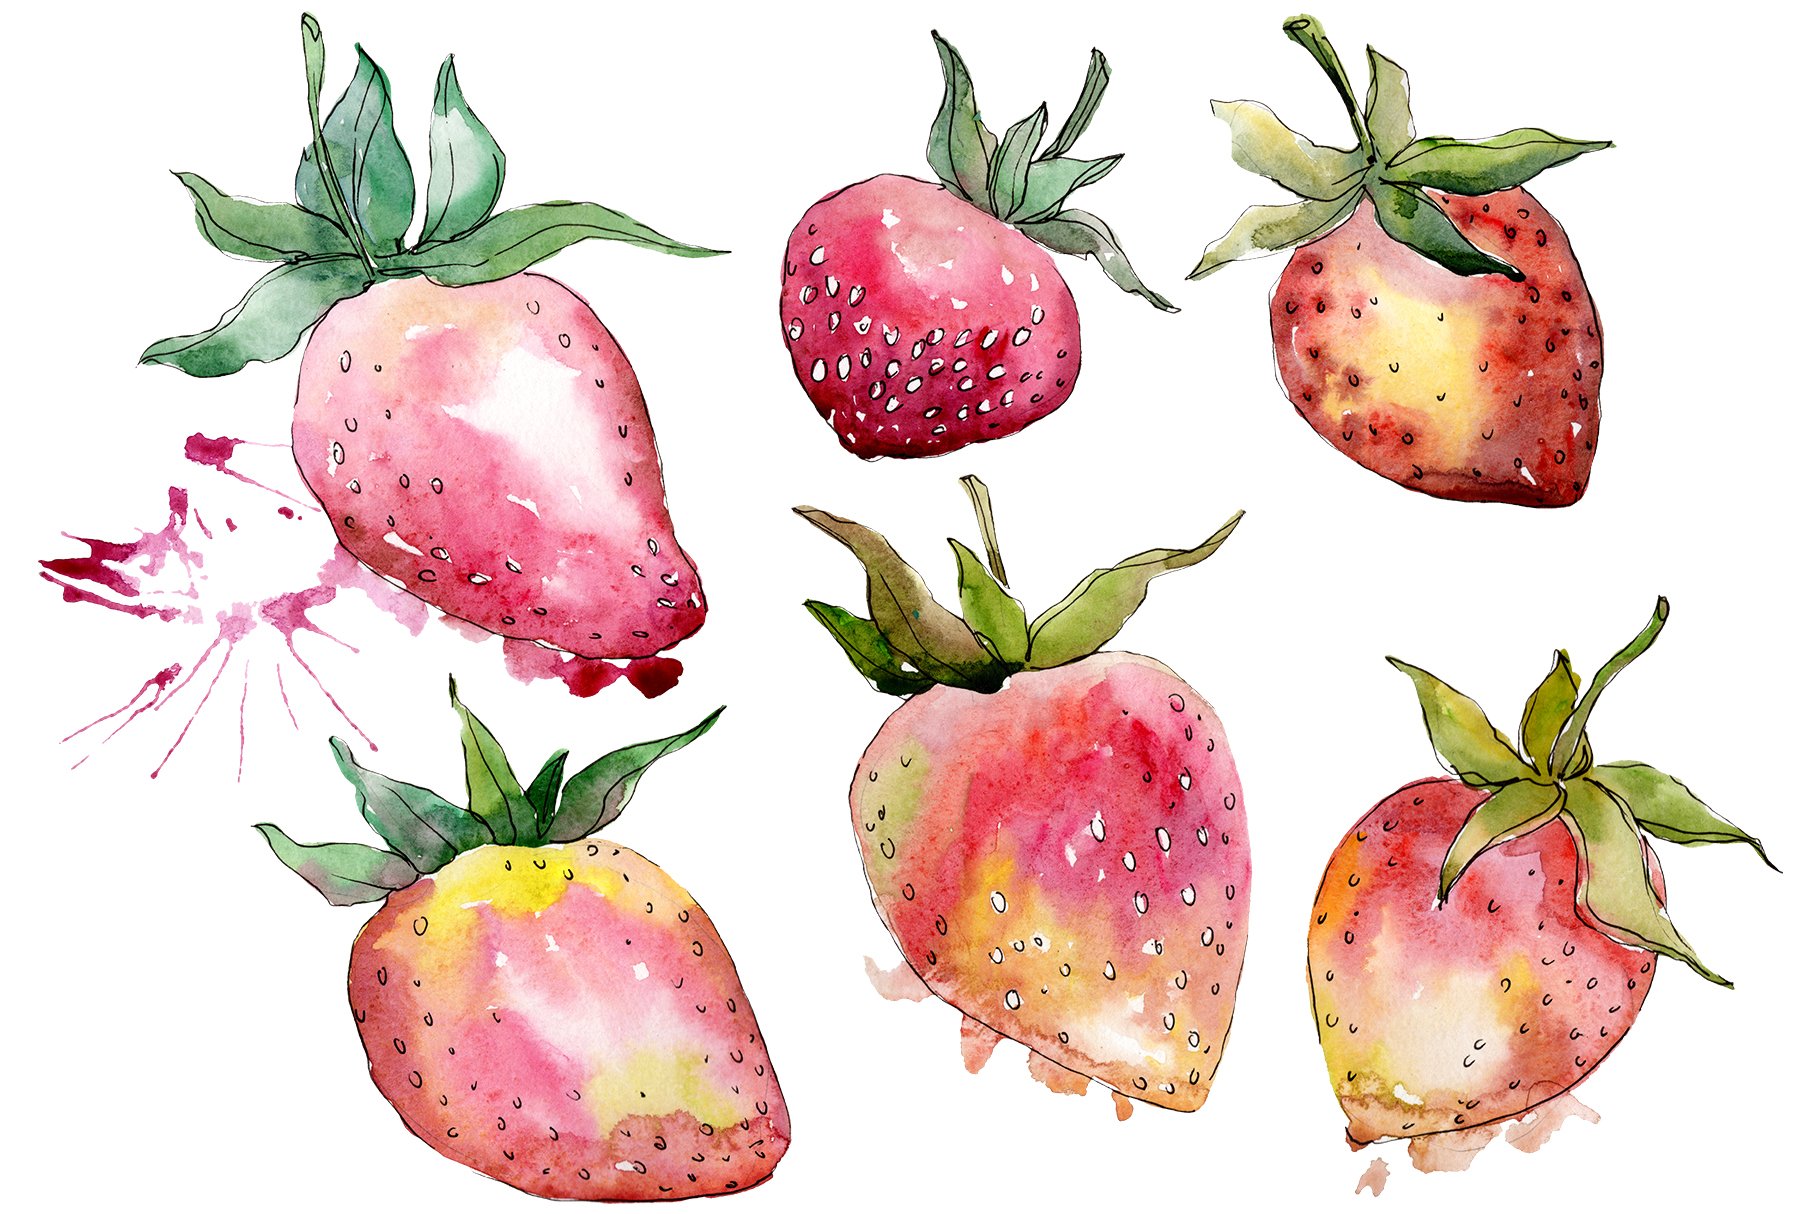 Cool and realistic strawberries illustrations.